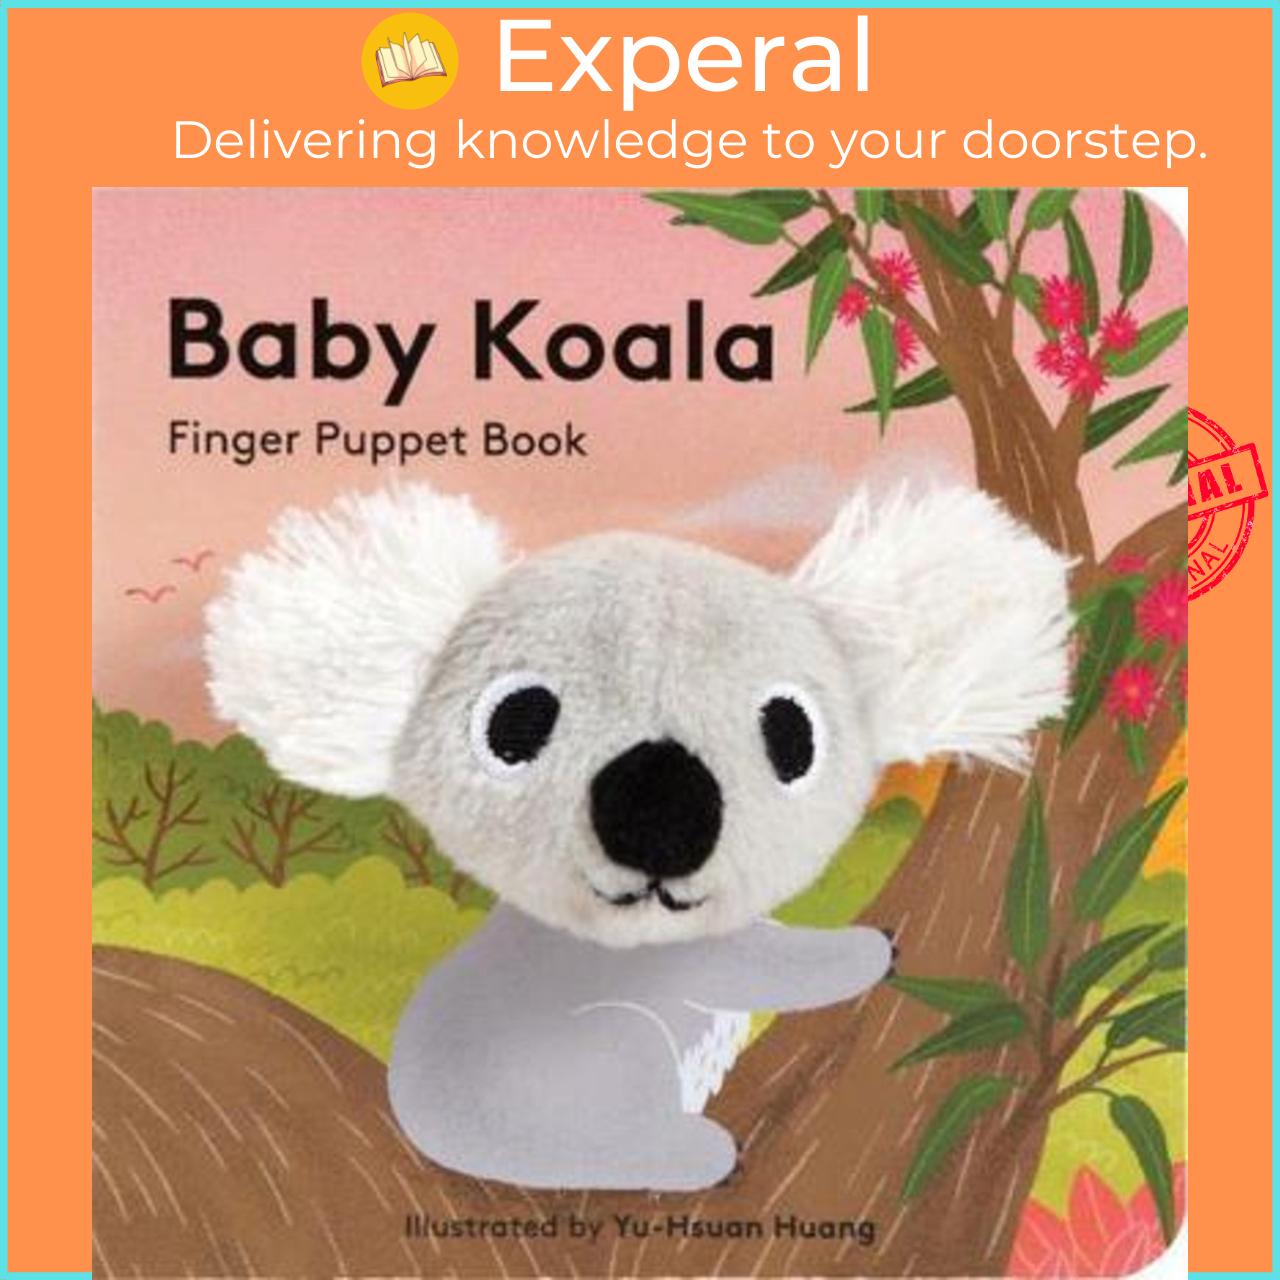 Sách - Baby Koala: Finger Puppet Book by Yu-hsuan Huang (US edition, paperback)